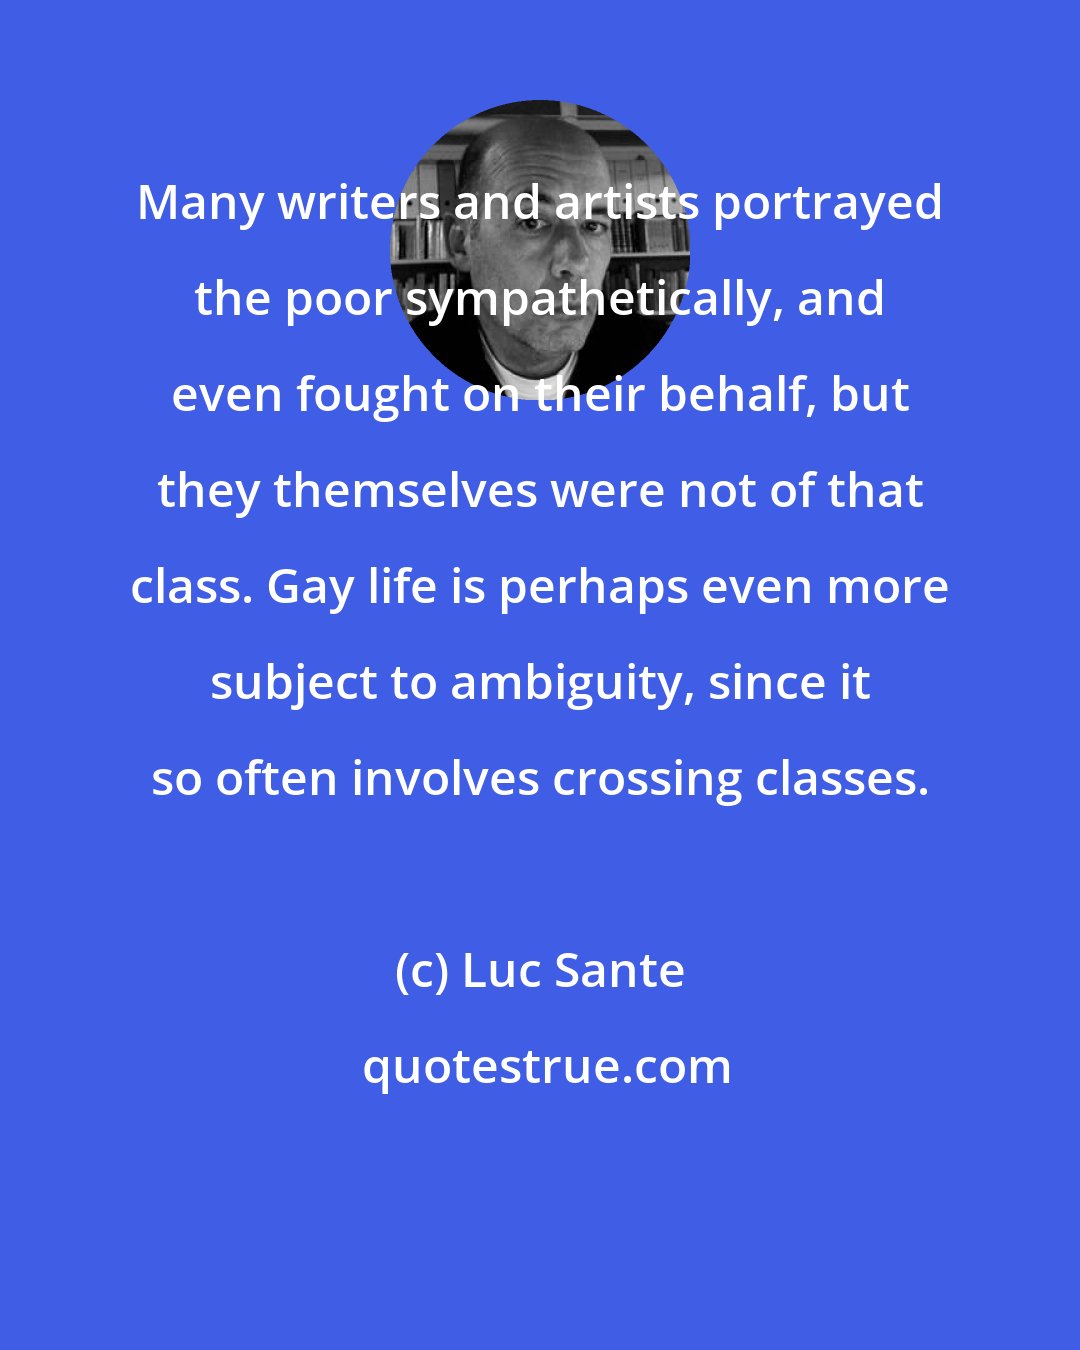 Luc Sante: Many writers and artists portrayed the poor sympathetically, and even fought on their behalf, but they themselves were not of that class. Gay life is perhaps even more subject to ambiguity, since it so often involves crossing classes.